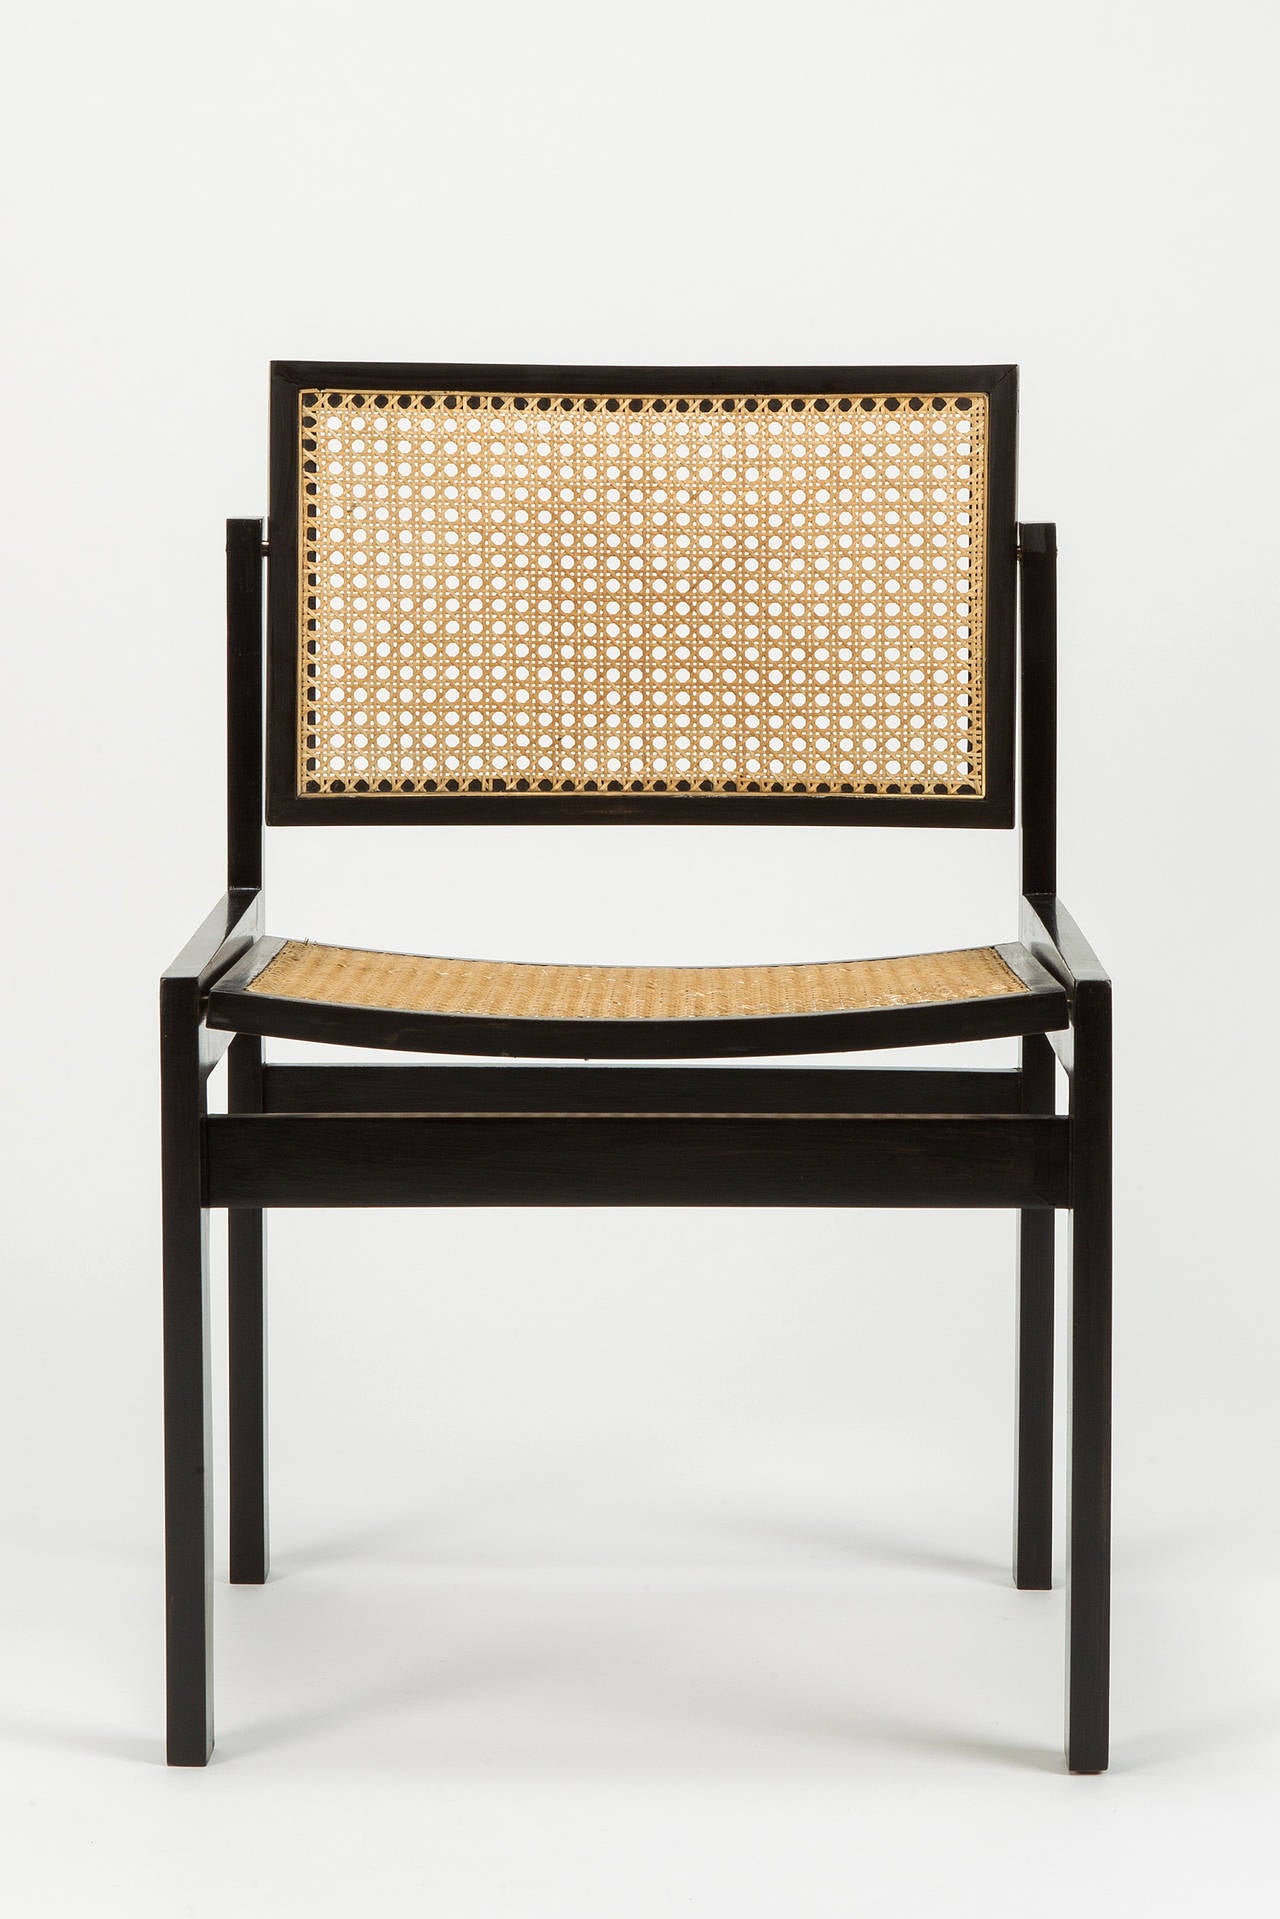 Pair of classical Swiss design chairs by Kurt Thut, designed in 1955 as the diploma thesis at the art school of Zurich, manufactured by Thut Mo¨bel in Switzerland in the late 1950s. Lacquered beech-wood frame and hole to hole caning seat and